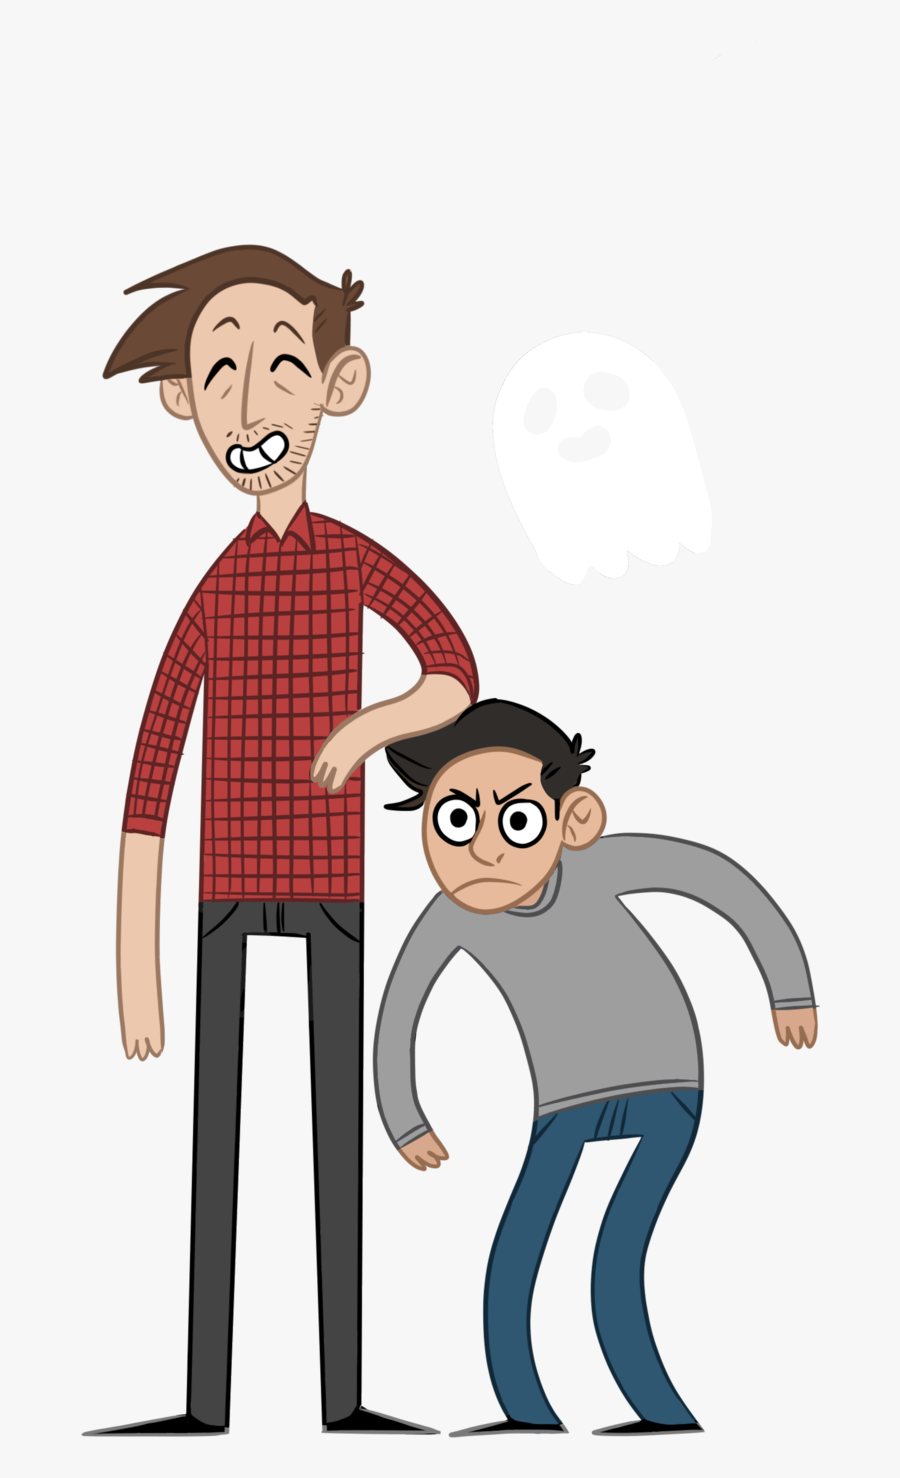 I Had A Rough Day So I Drew The Boys With A Lil’ Ghost - Cartoon, Transparent Clipart